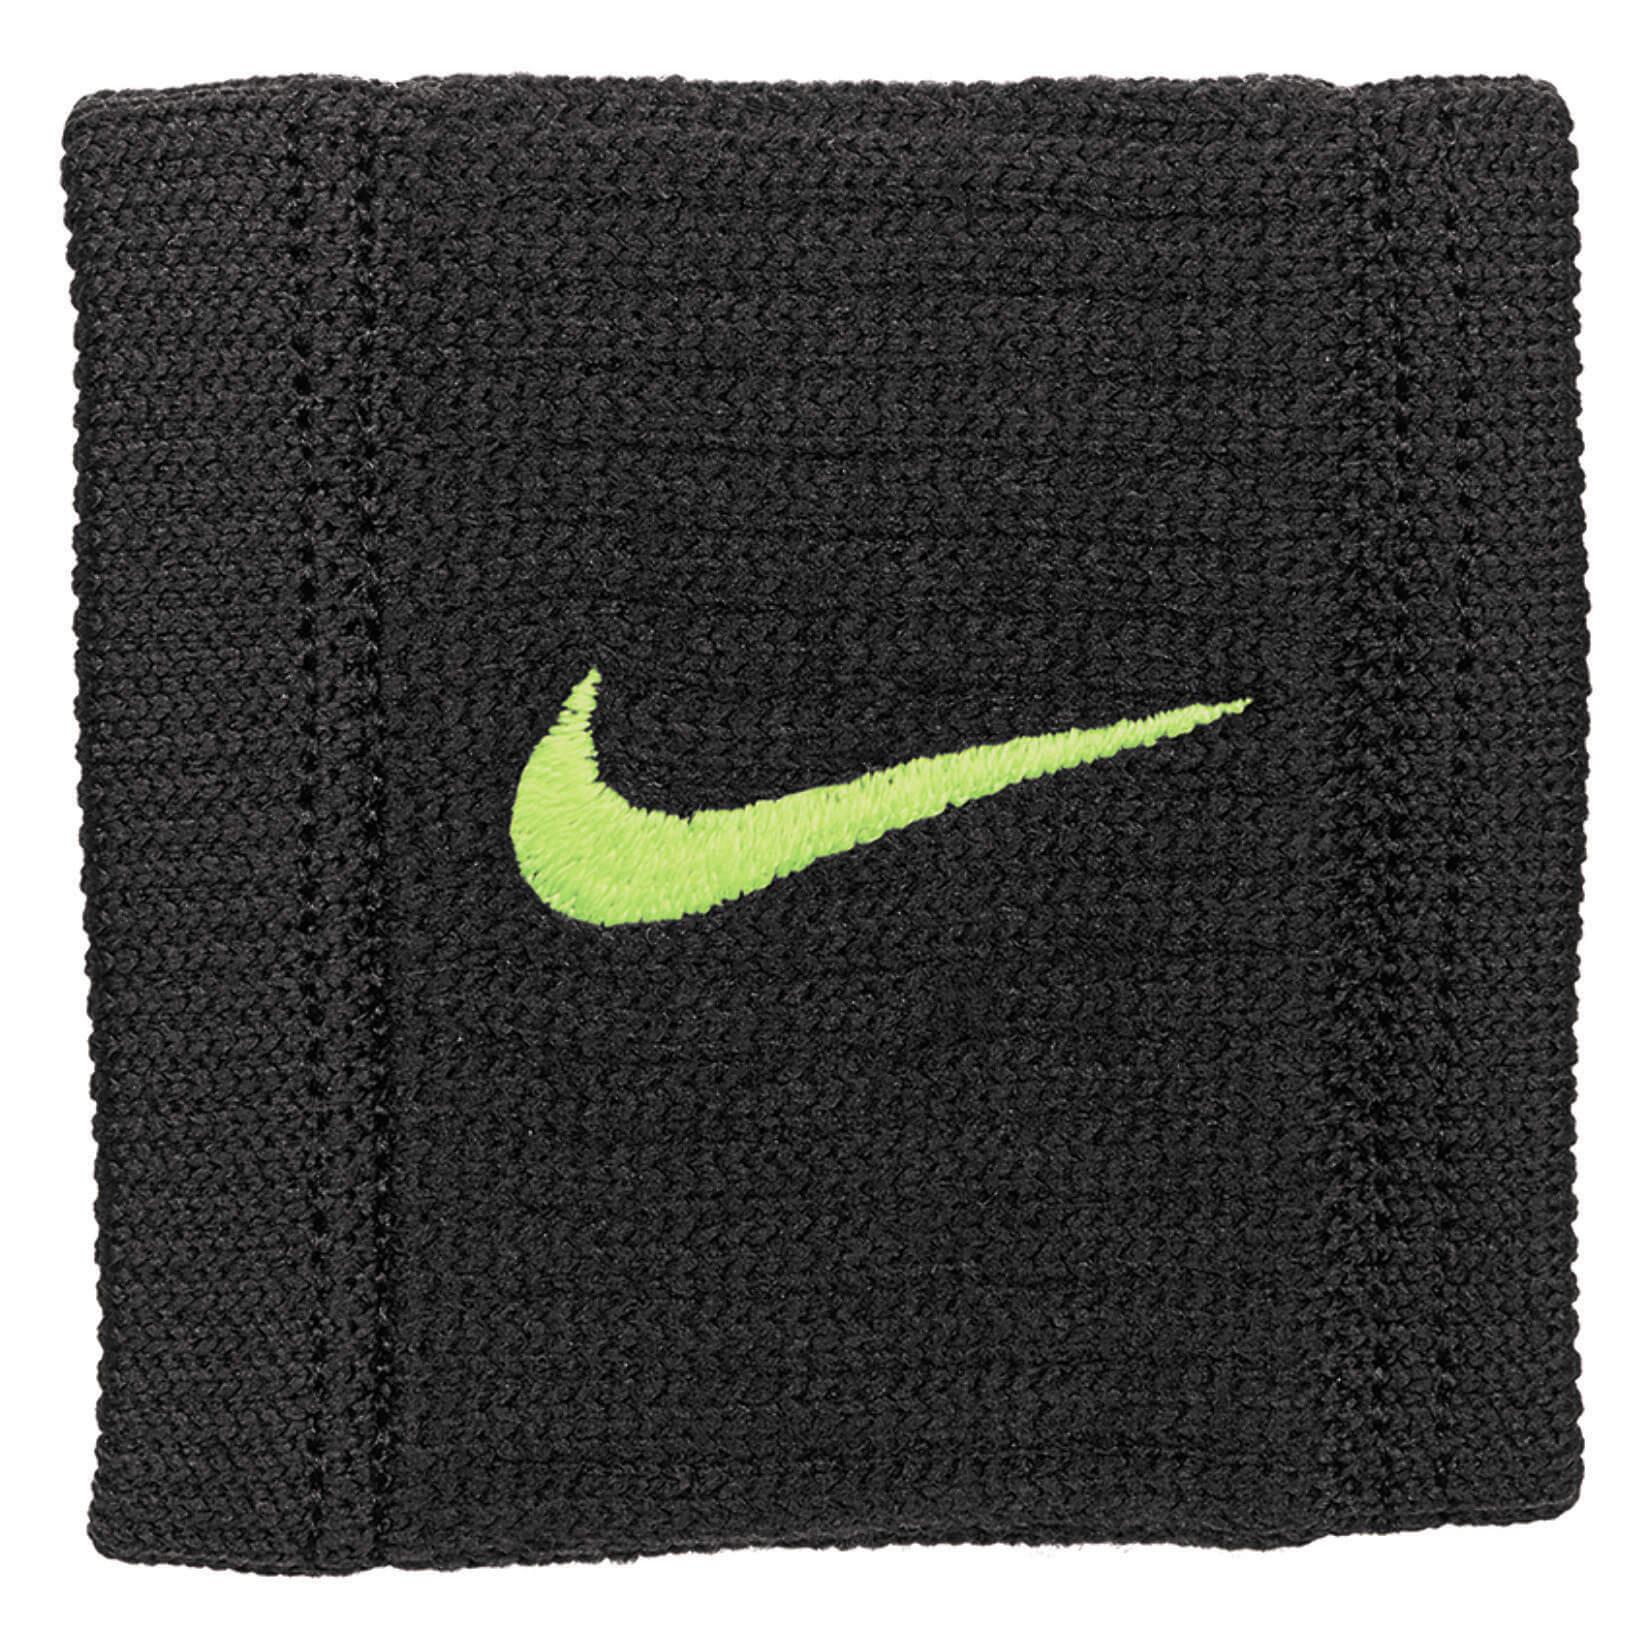 Nike Dri-Fit Reveal Wristbands (One Pair)